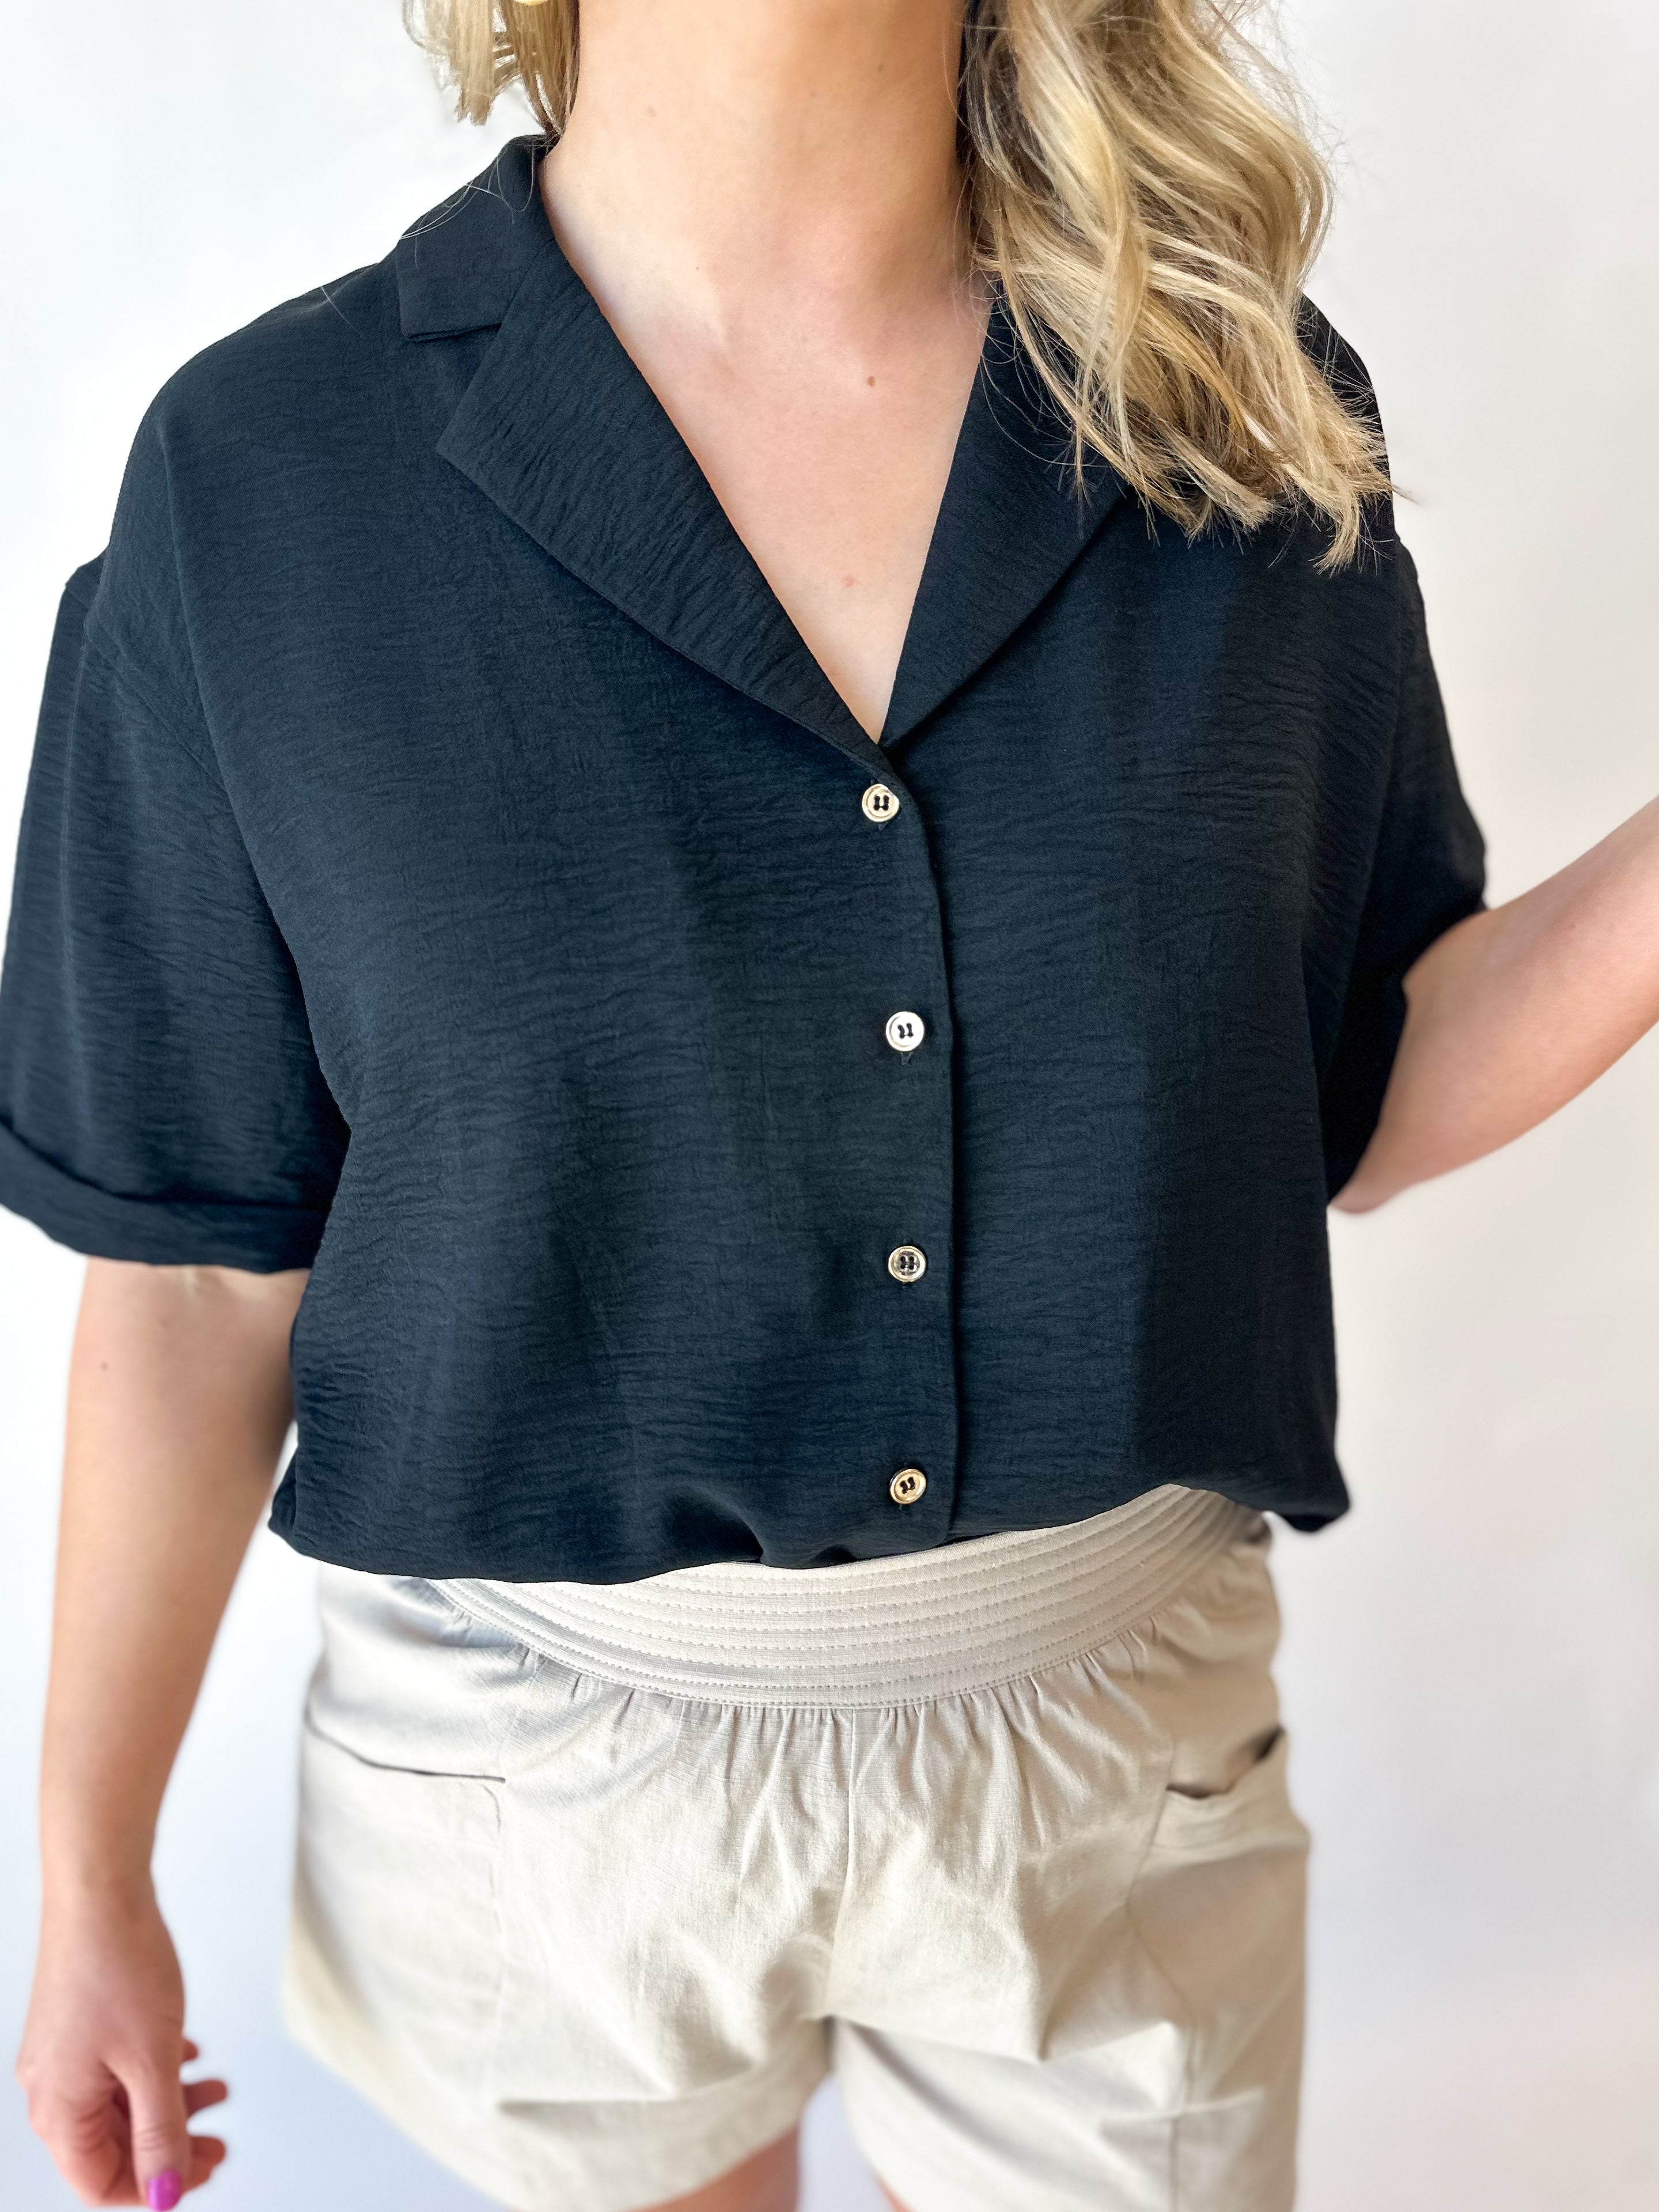 Throw On And Go Blouse - Black-200 Fashion Blouses-ENTRO-July & June Women's Fashion Boutique Located in San Antonio, Texas